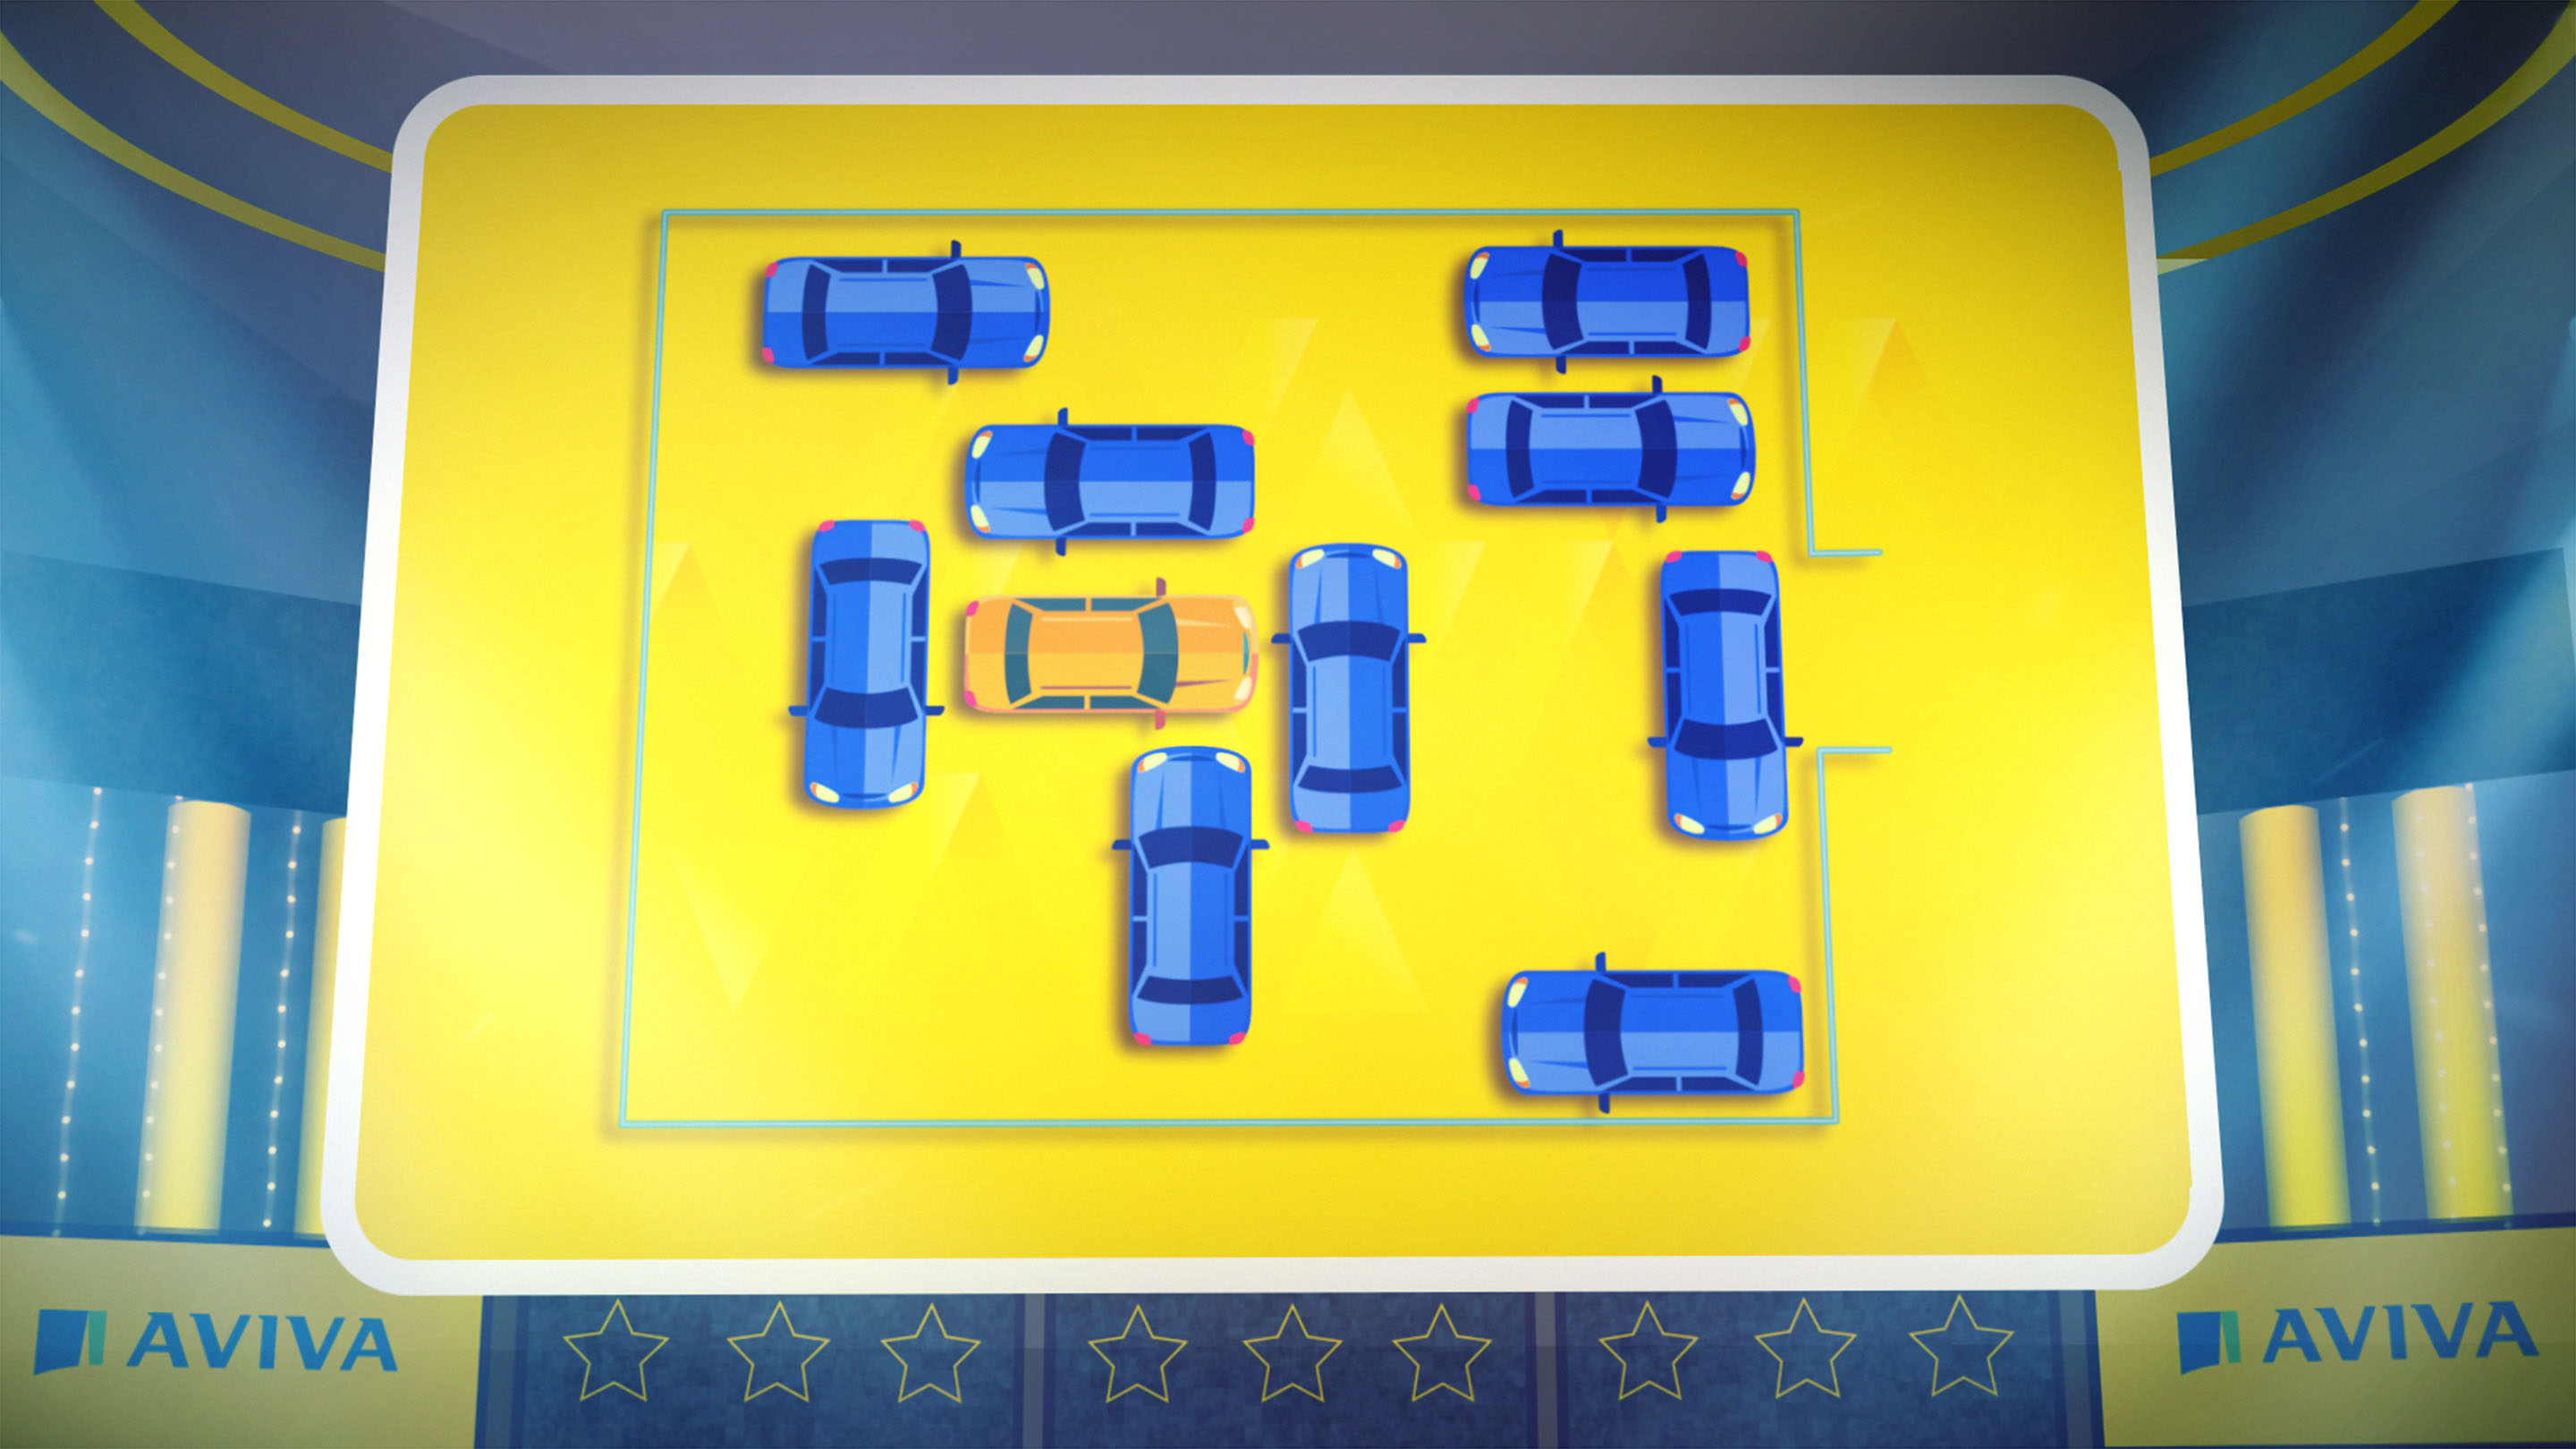 Puzzle involving cars. There is one yellow car surrounded by many blue cars.